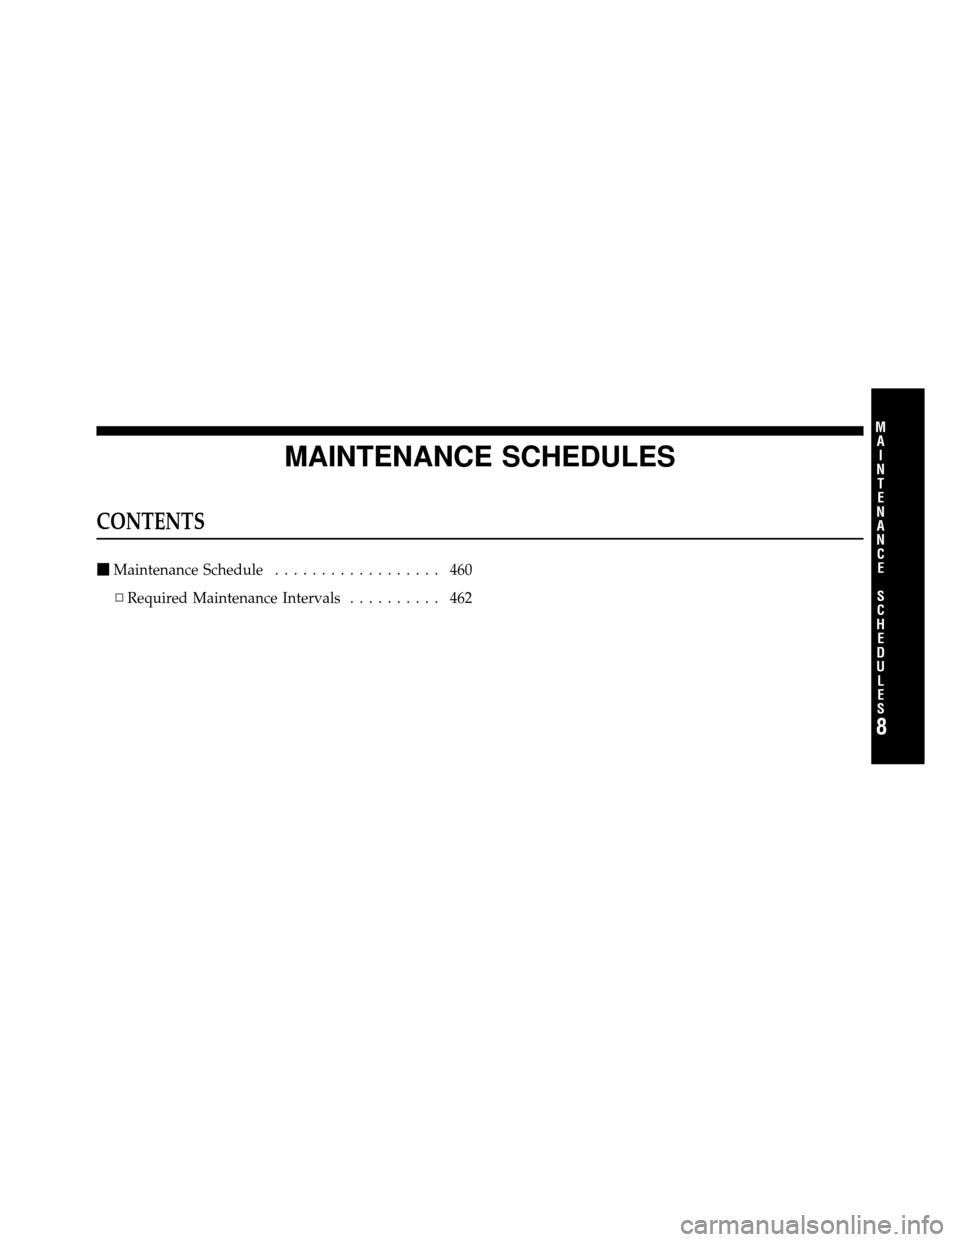 CHRYSLER 200 2012 1.G Owners Manual MAINTENANCE SCHEDULES
CONTENTS
Maintenance Schedule .................. 460
▫ Required Maintenance Intervals .......... 462
8
M
A I
N T
E
N A
N CE
S
C
H E
D
U L
E
S 